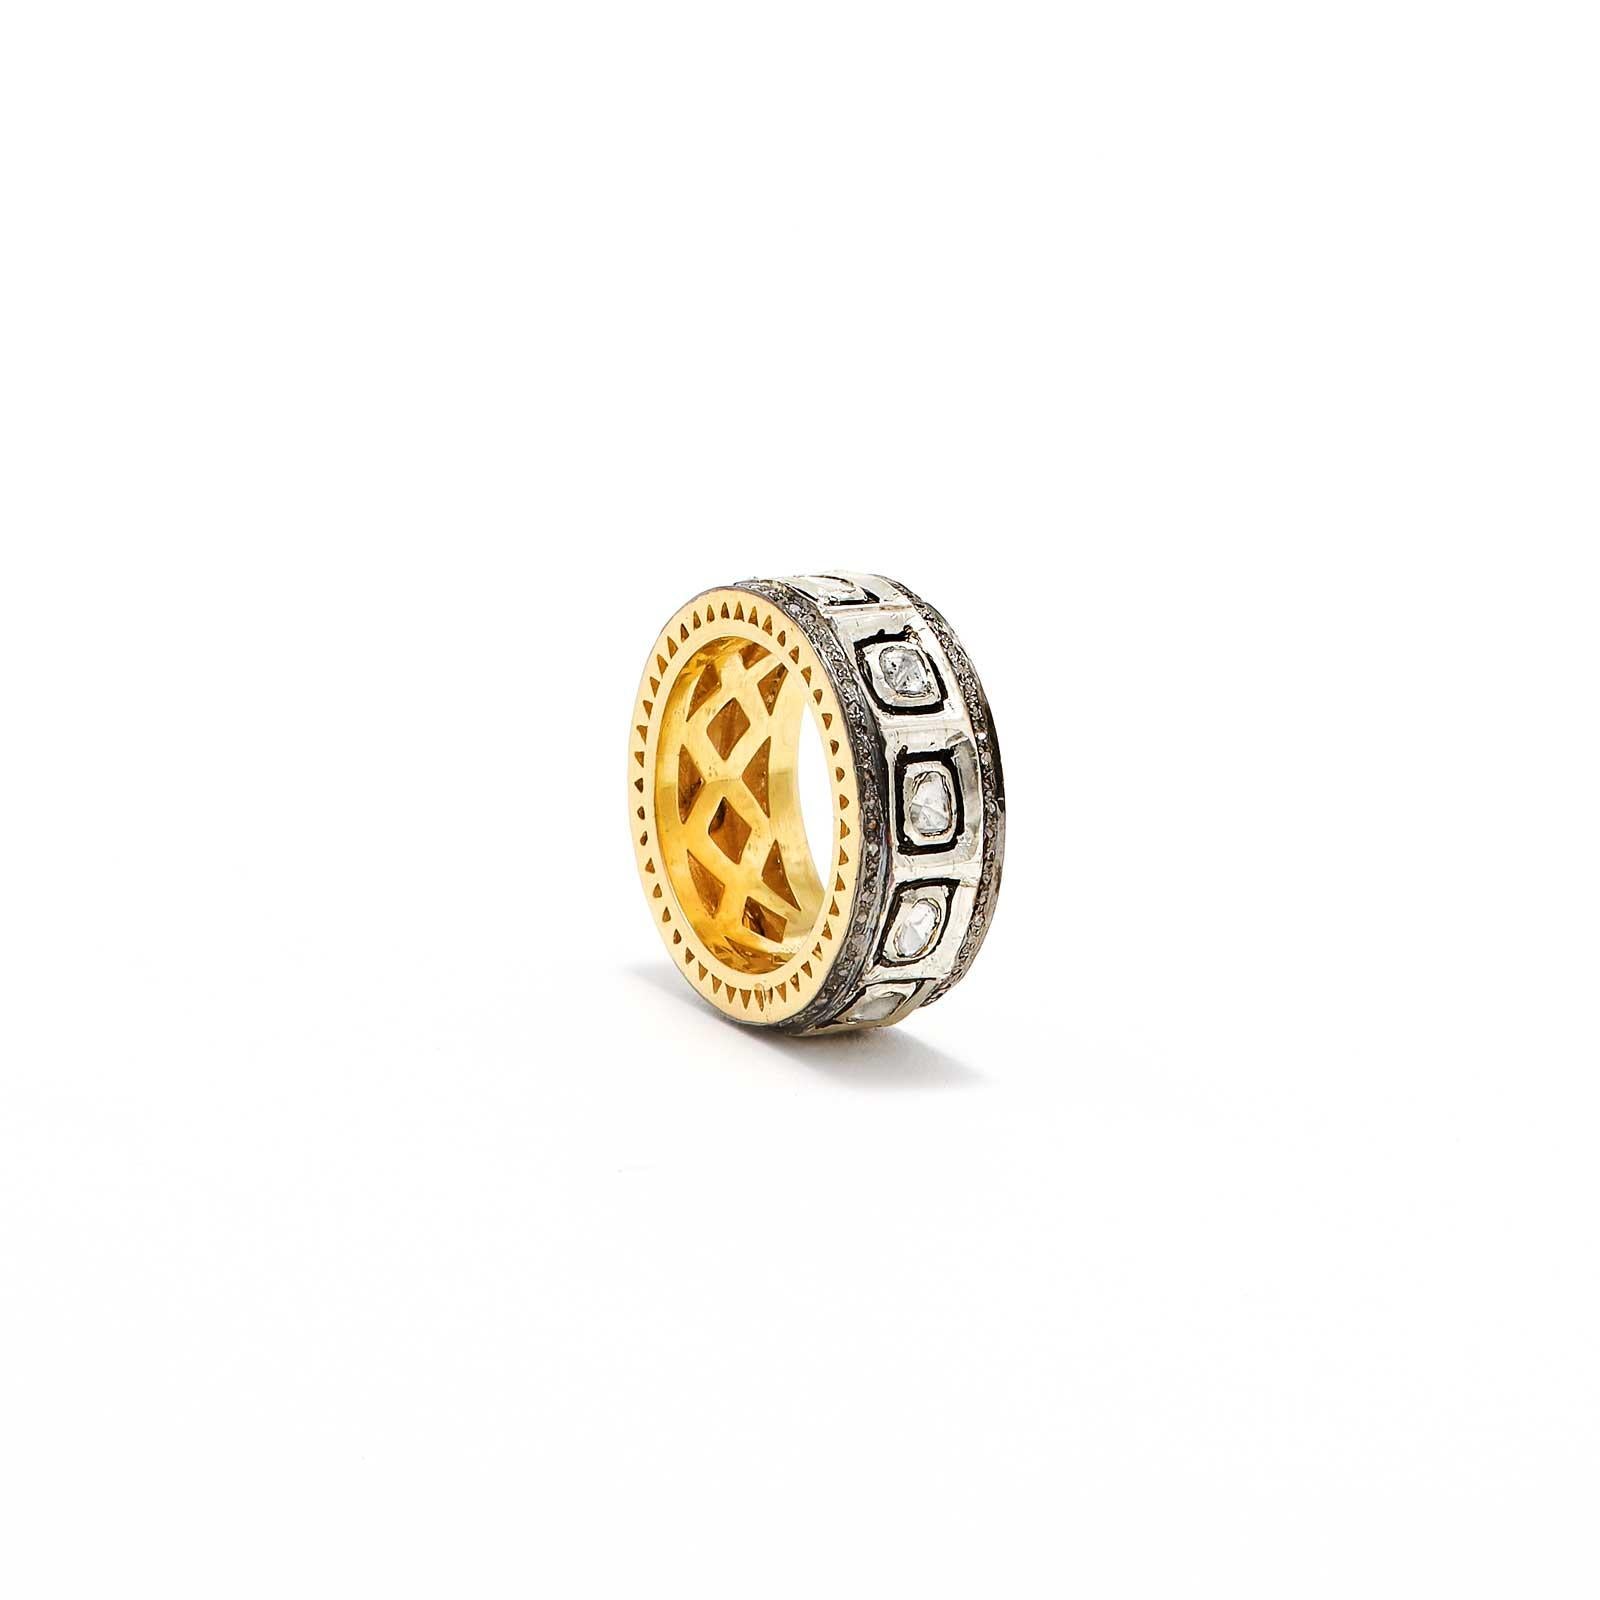 gold overlay - gold overlay rings